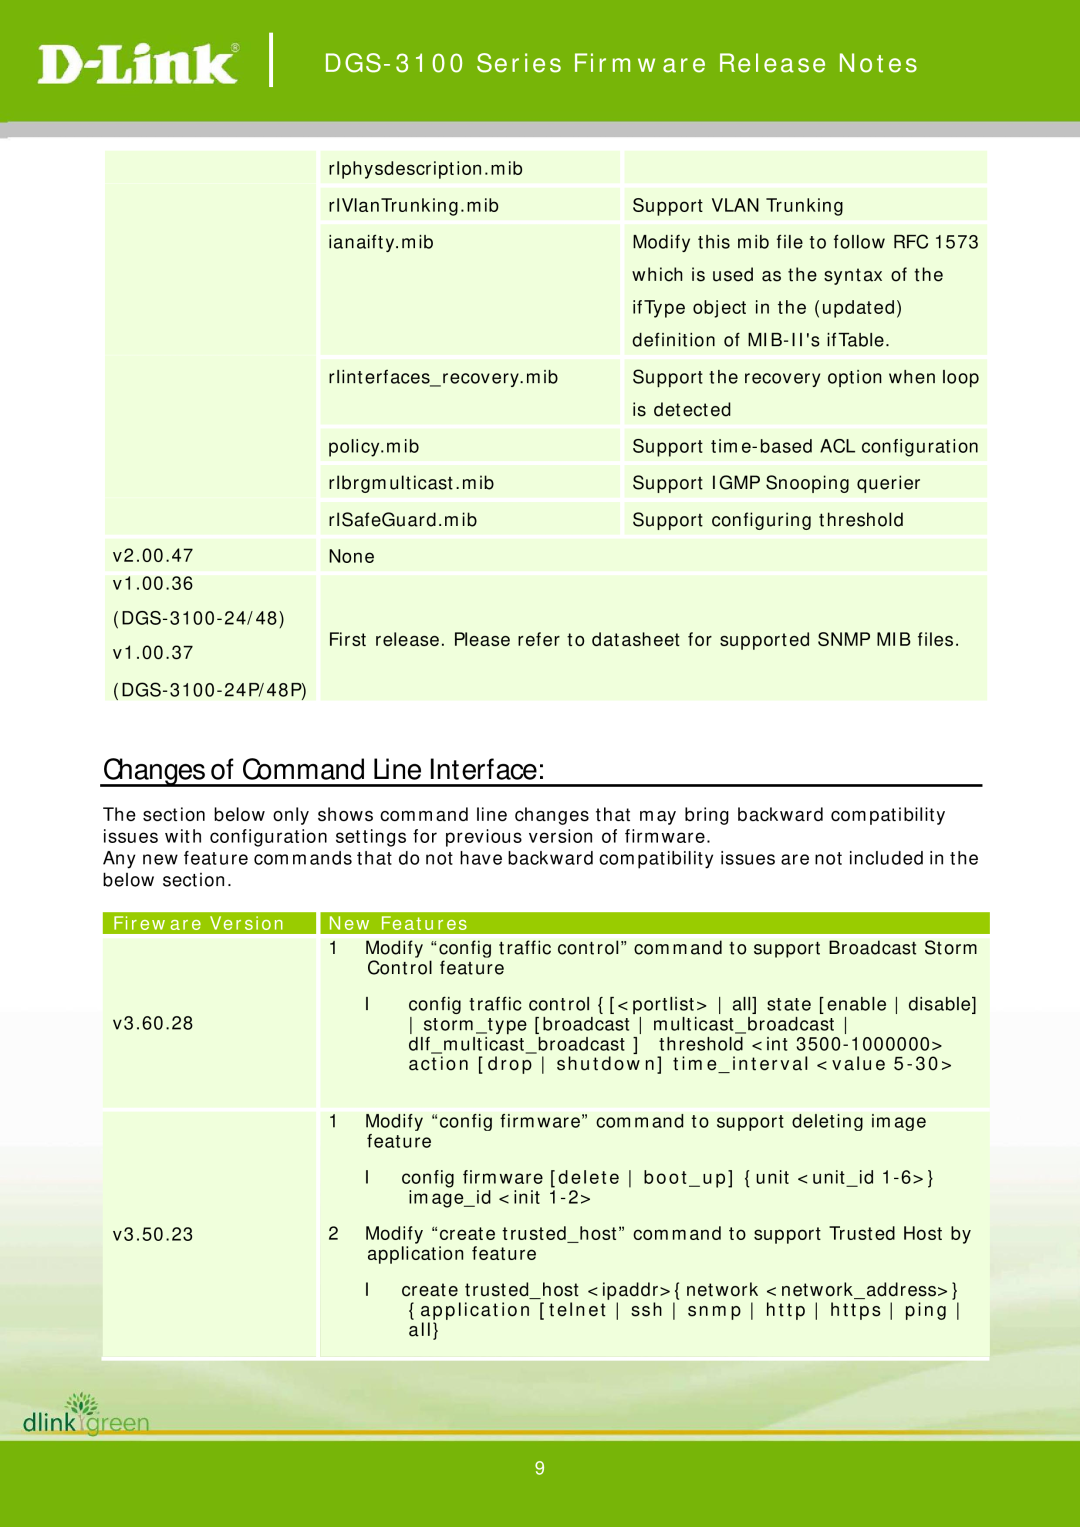 D-Link 3.60.28 Changes of Command Line Interface, Fireware Version, action drop shutdown timeinterval value, New Features 